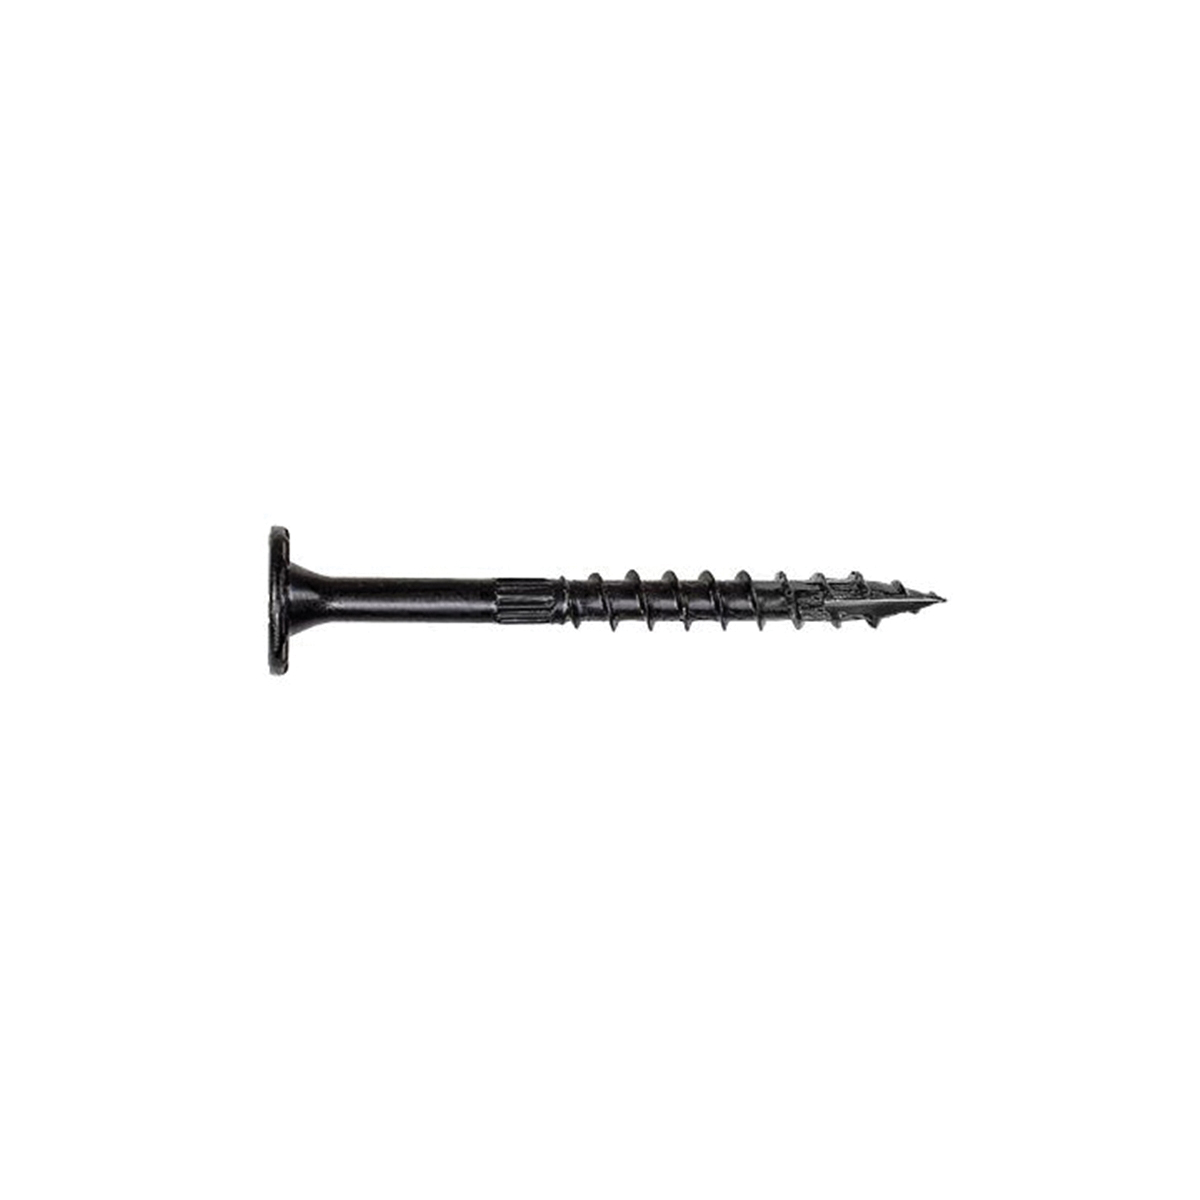 Outdoor Accents SDWS22312DBB-RN1 Structural Screw, 3-1/2 in L, Saw Tooth Thread, Low-Profile Head